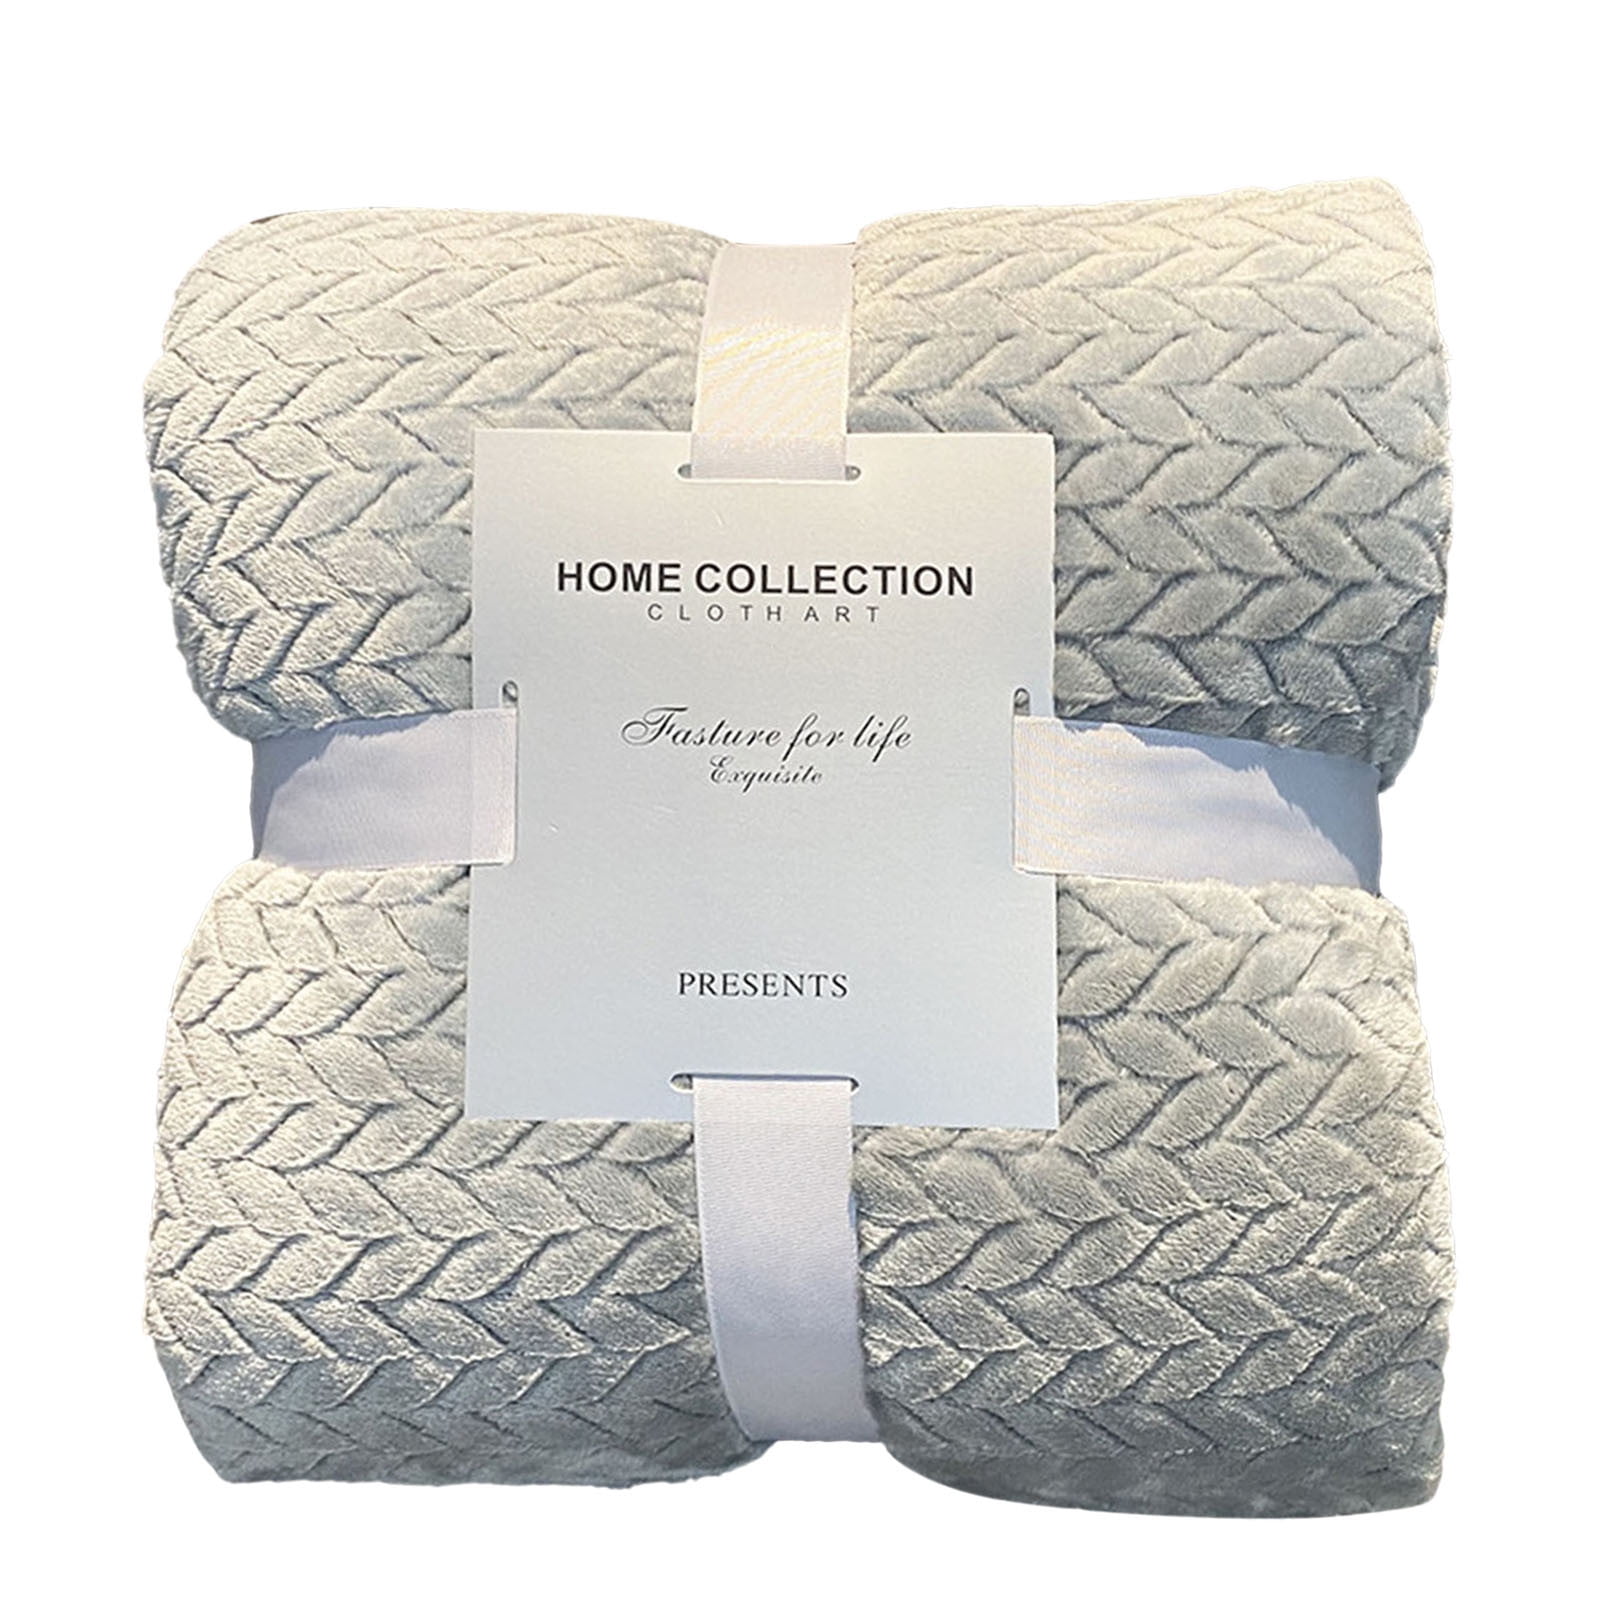 Throws & Blankets, Home